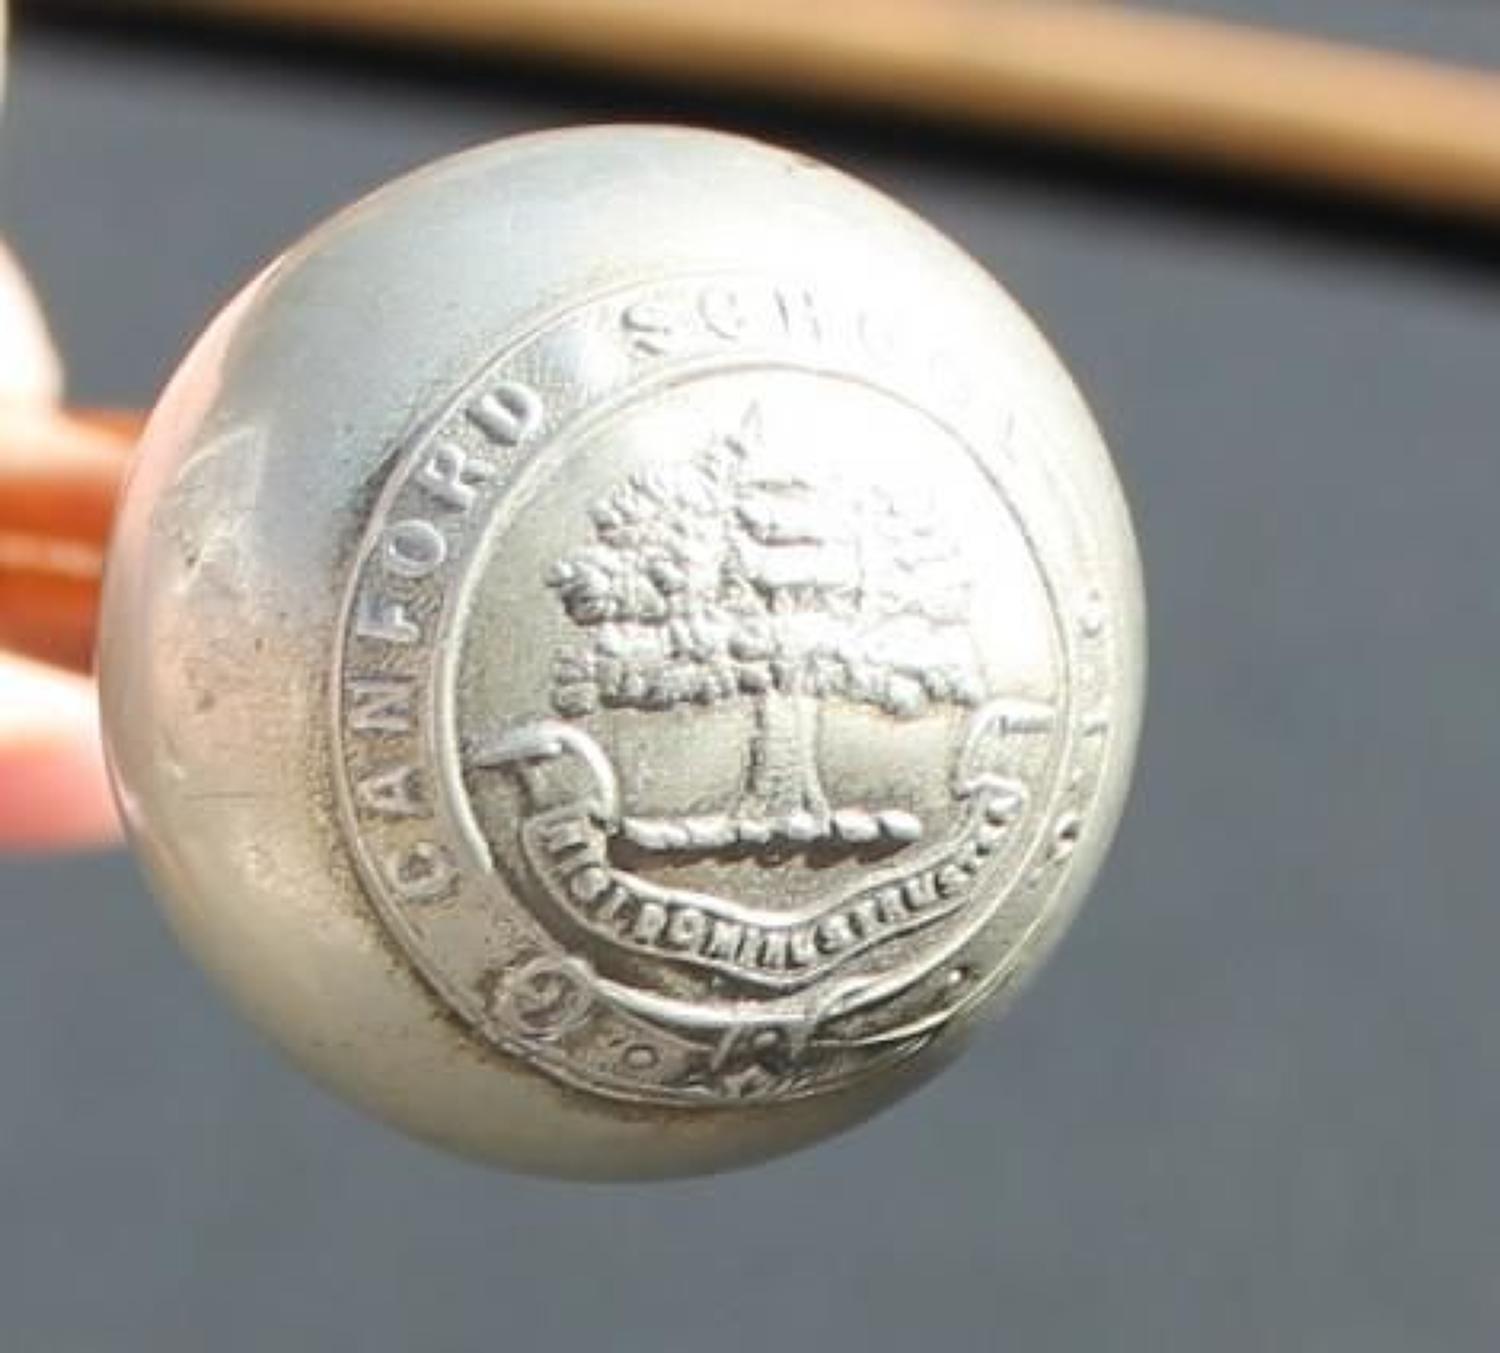 Canford School OTC Swagger Stick